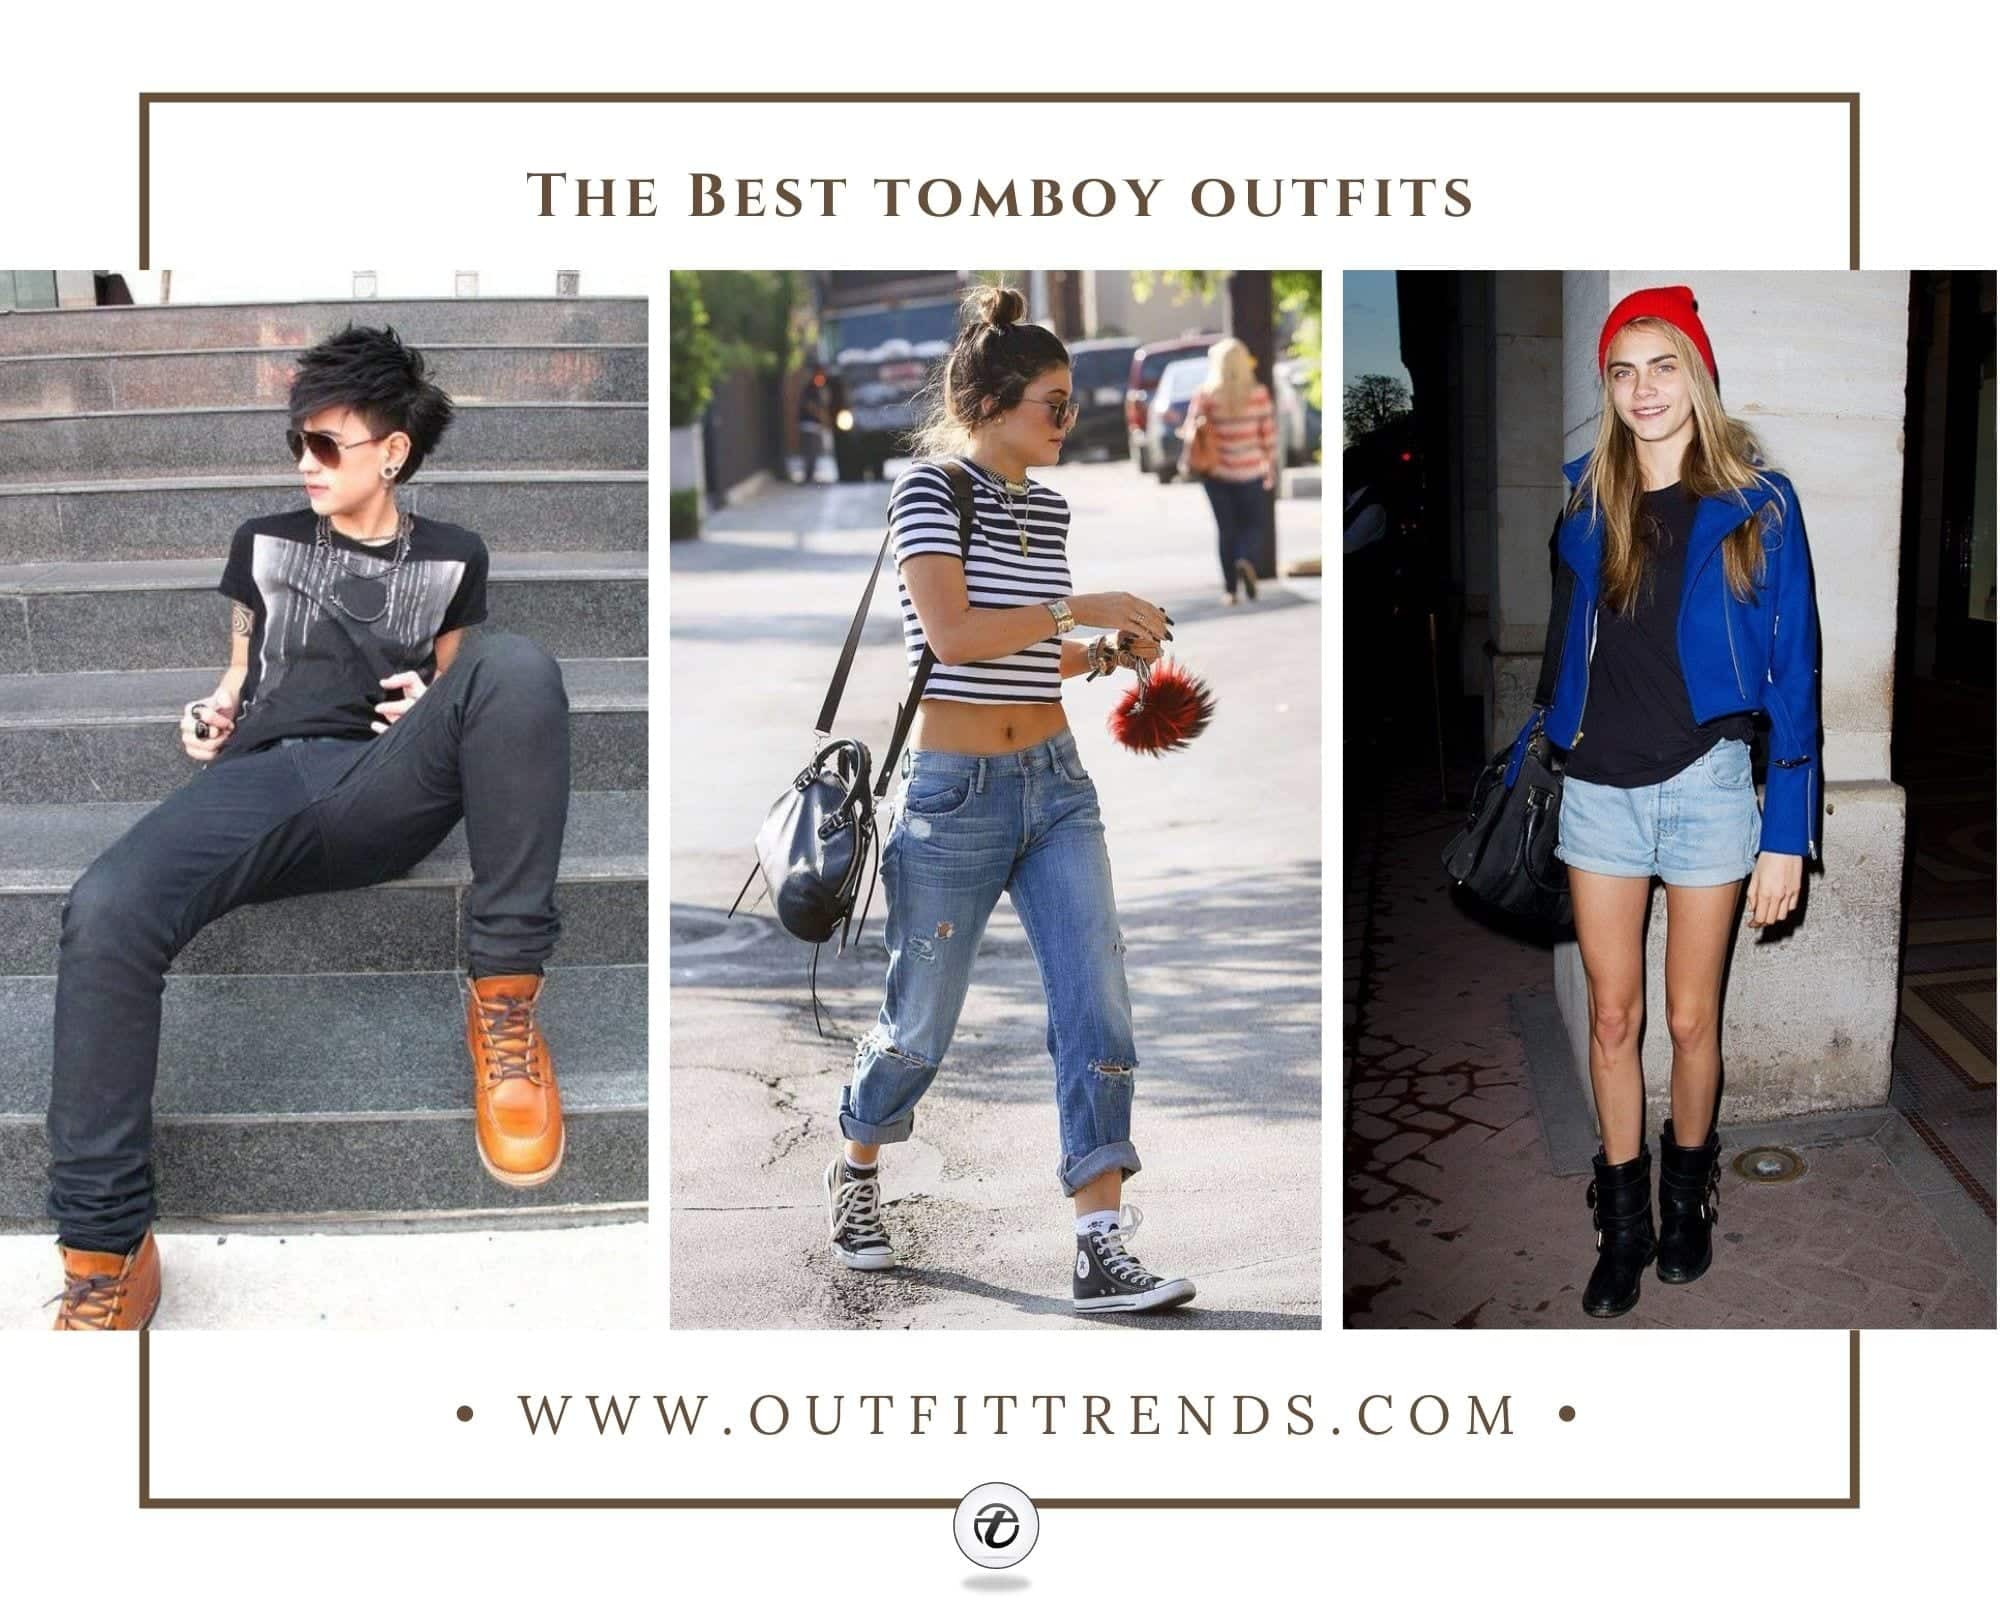 Tomboy Outfits 15 Tips How to Dress Like a Tomboy